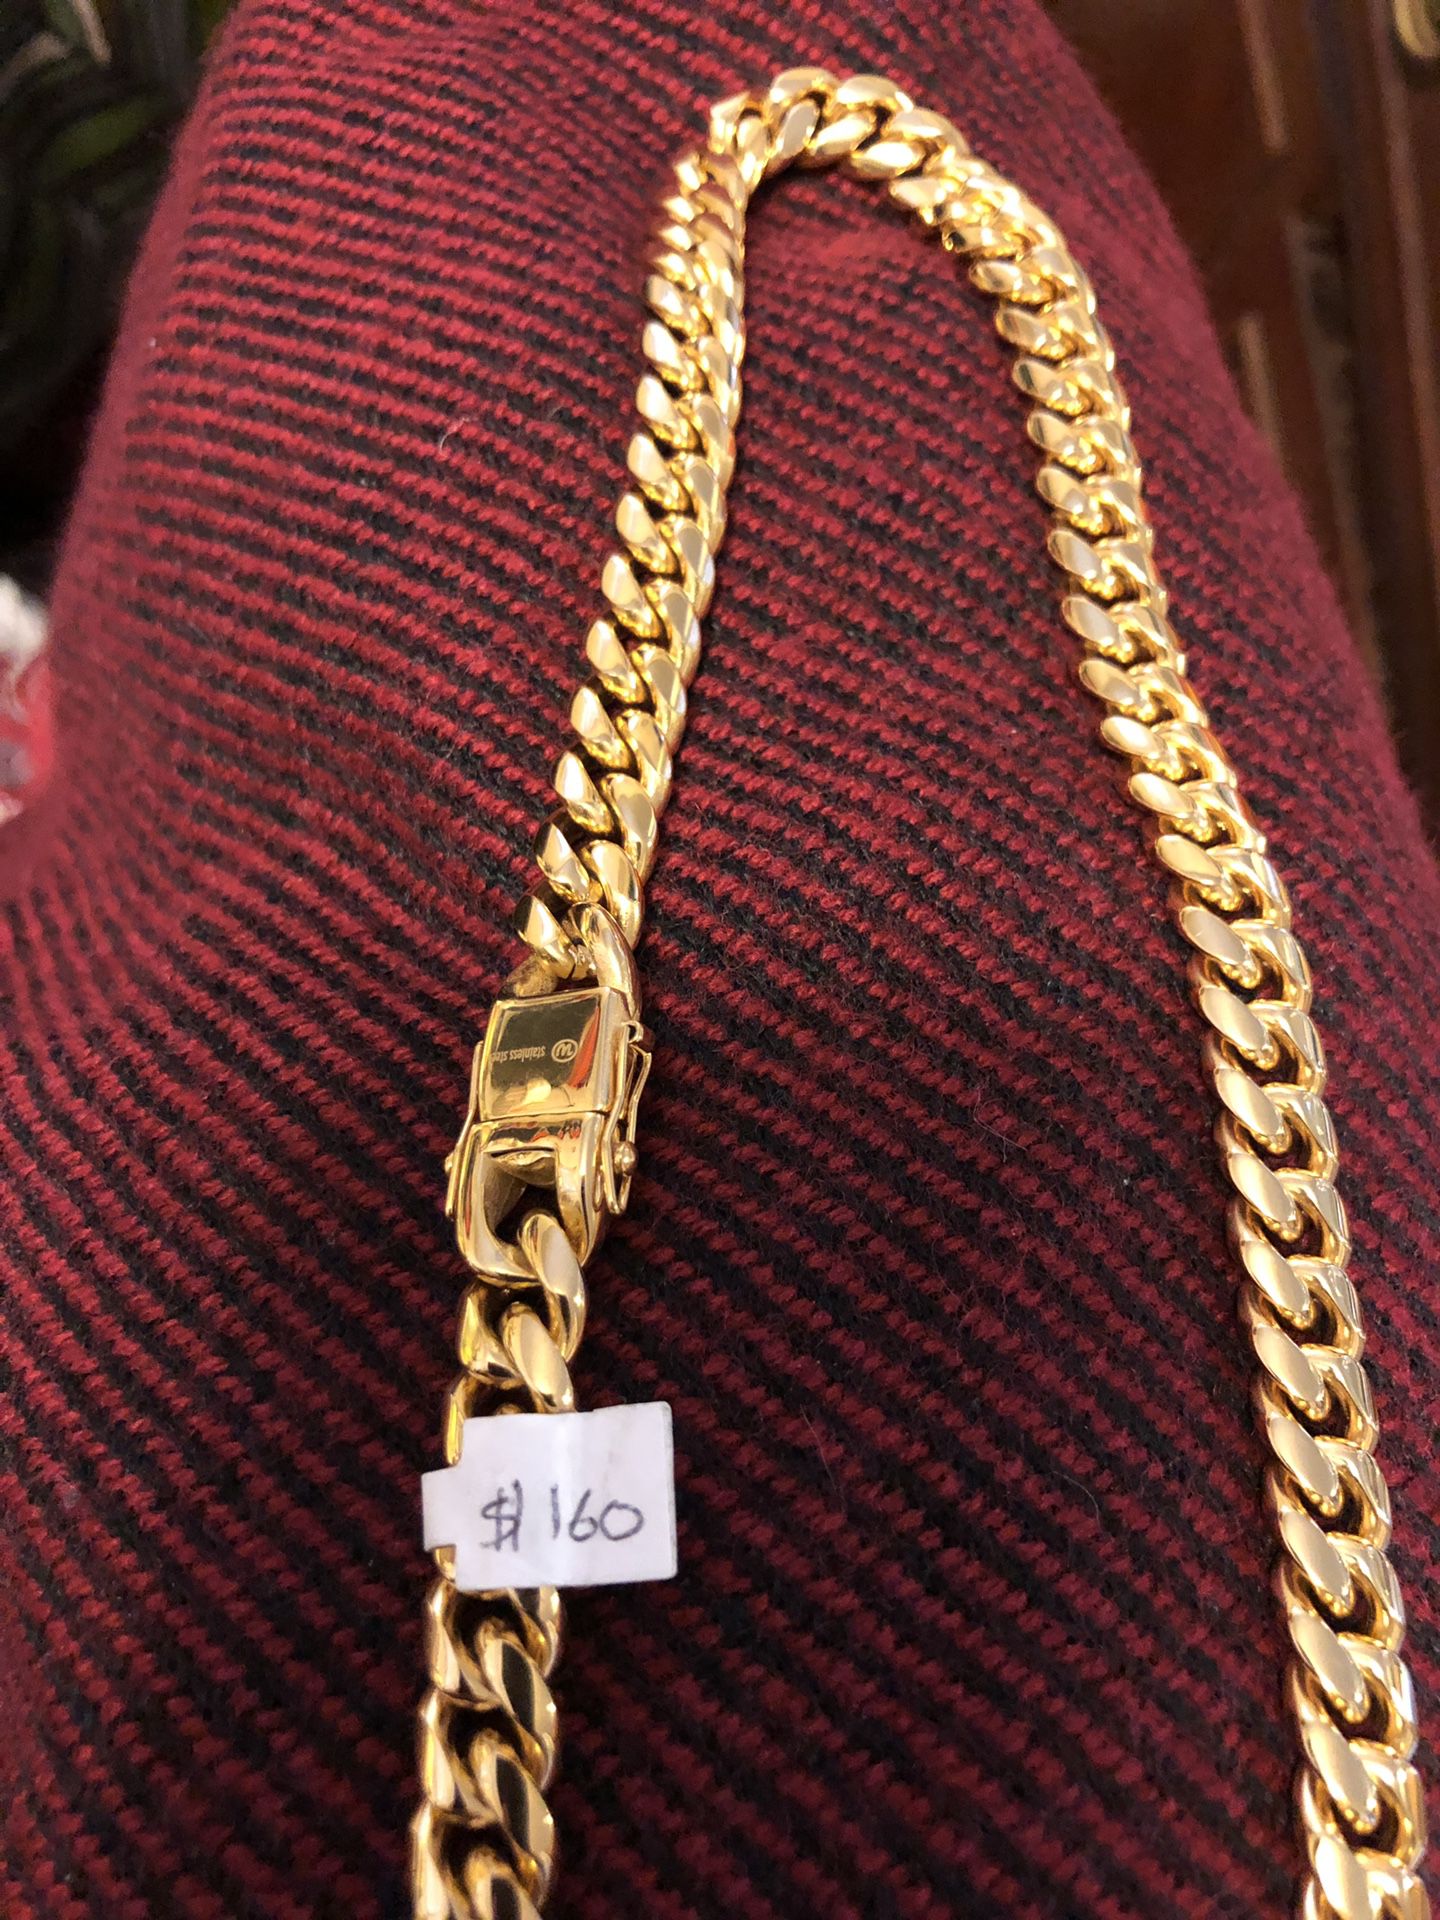 New Gold plated chain very good quality